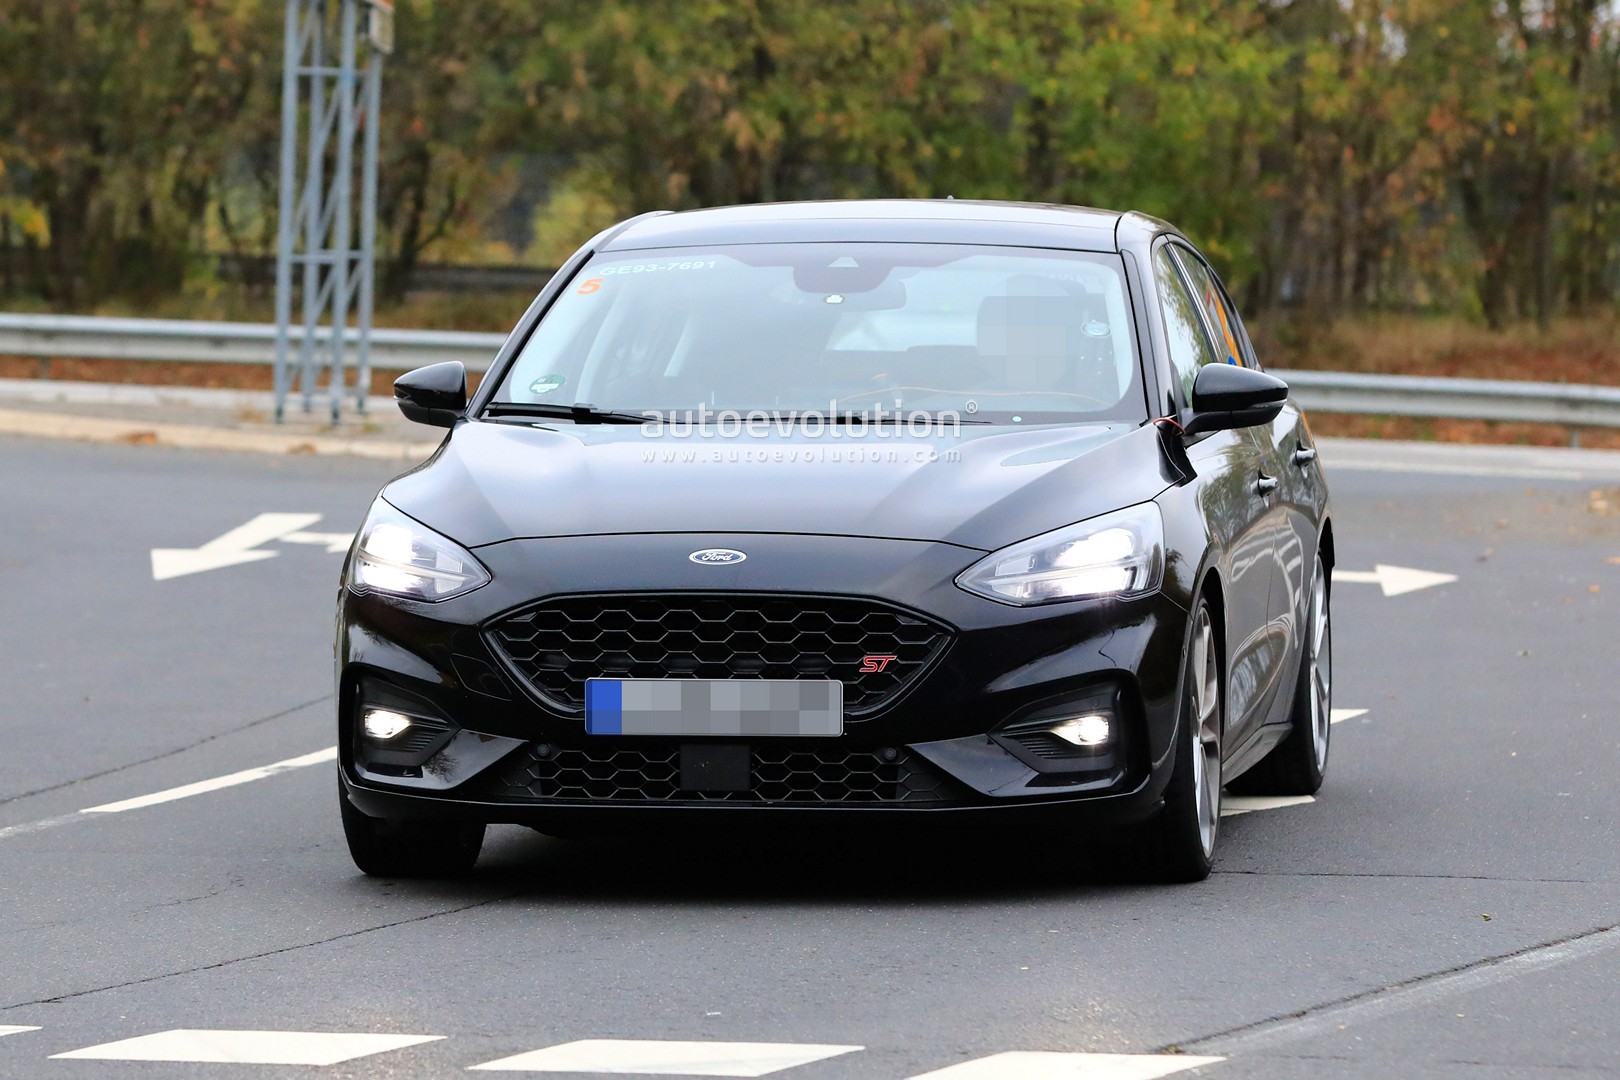 New Ford Focus St Interior Revealed 2 3l Engine Has